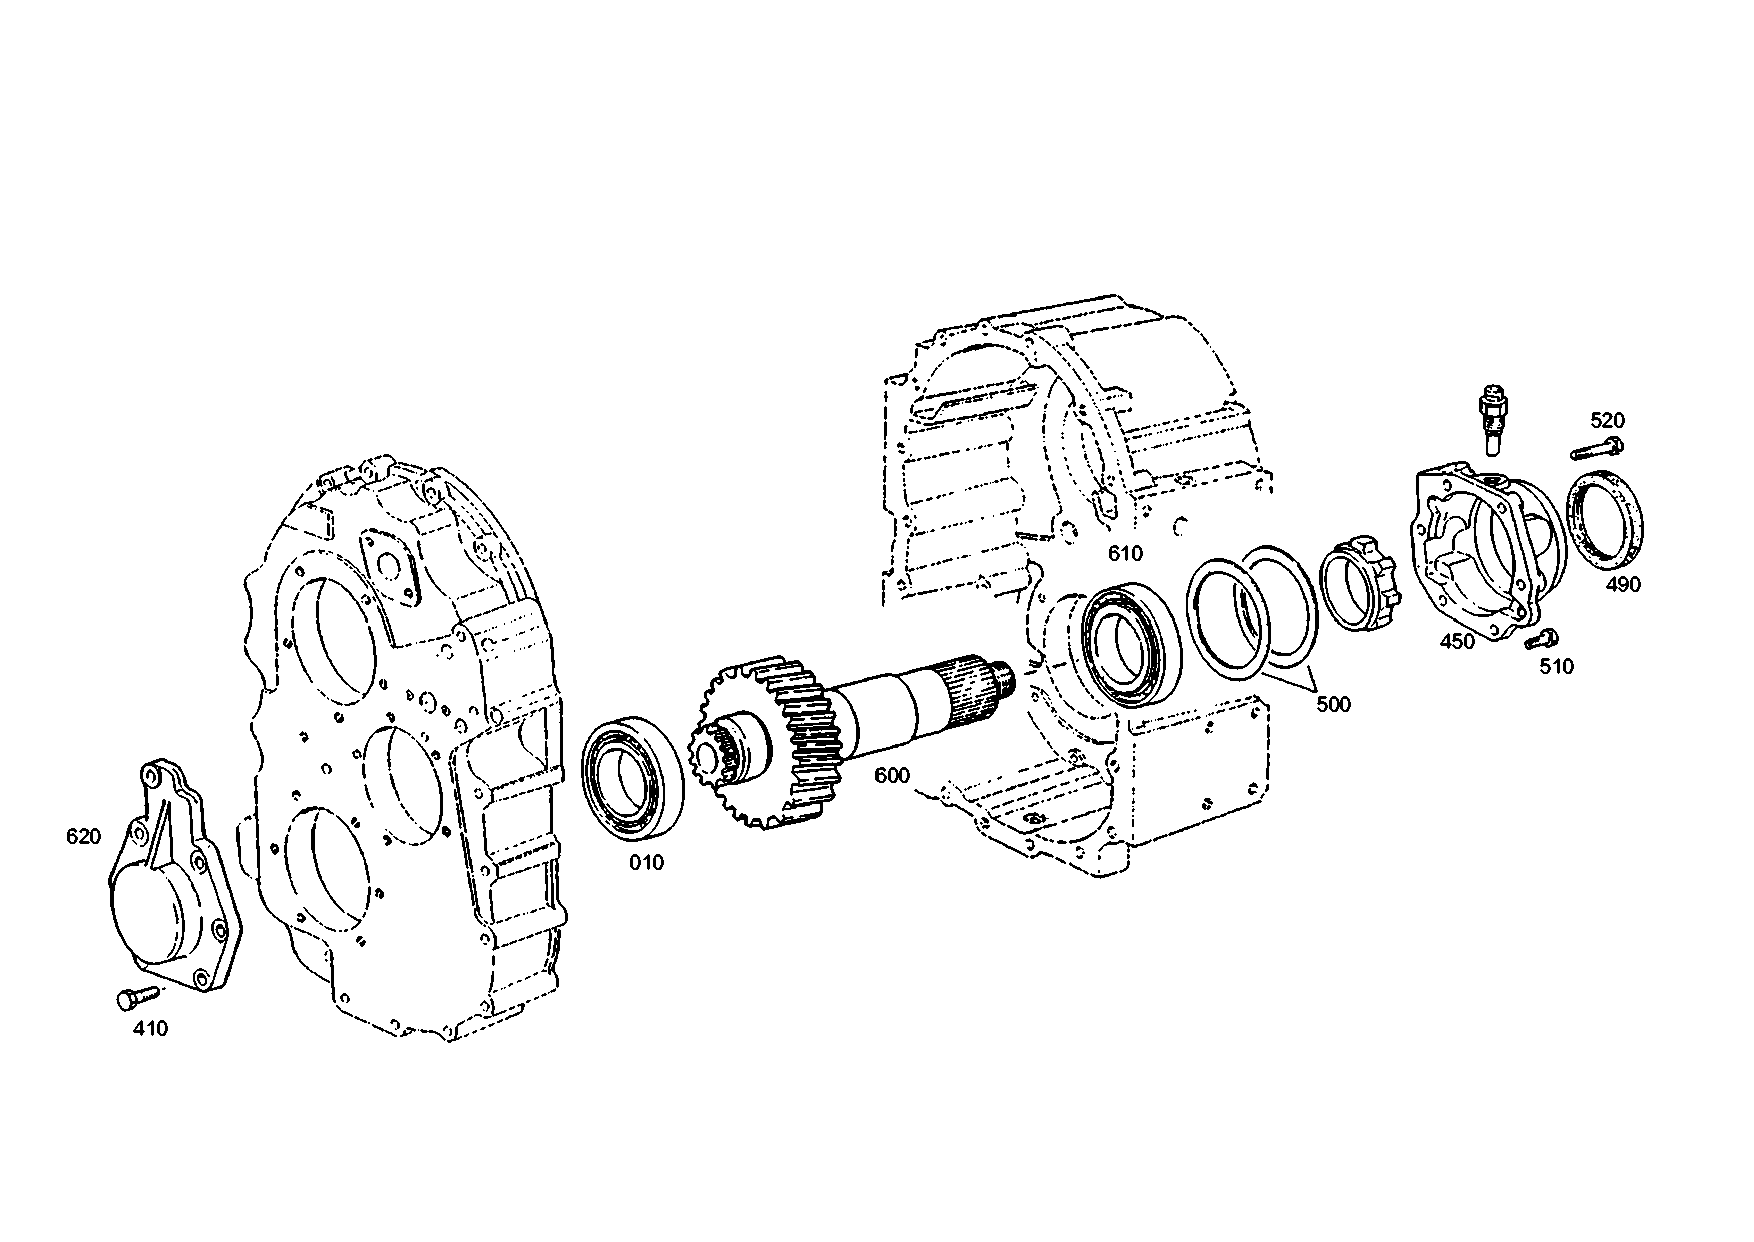 drawing for MARMON Herring MVG121075 - OUTPUT SHAFT (figure 4)